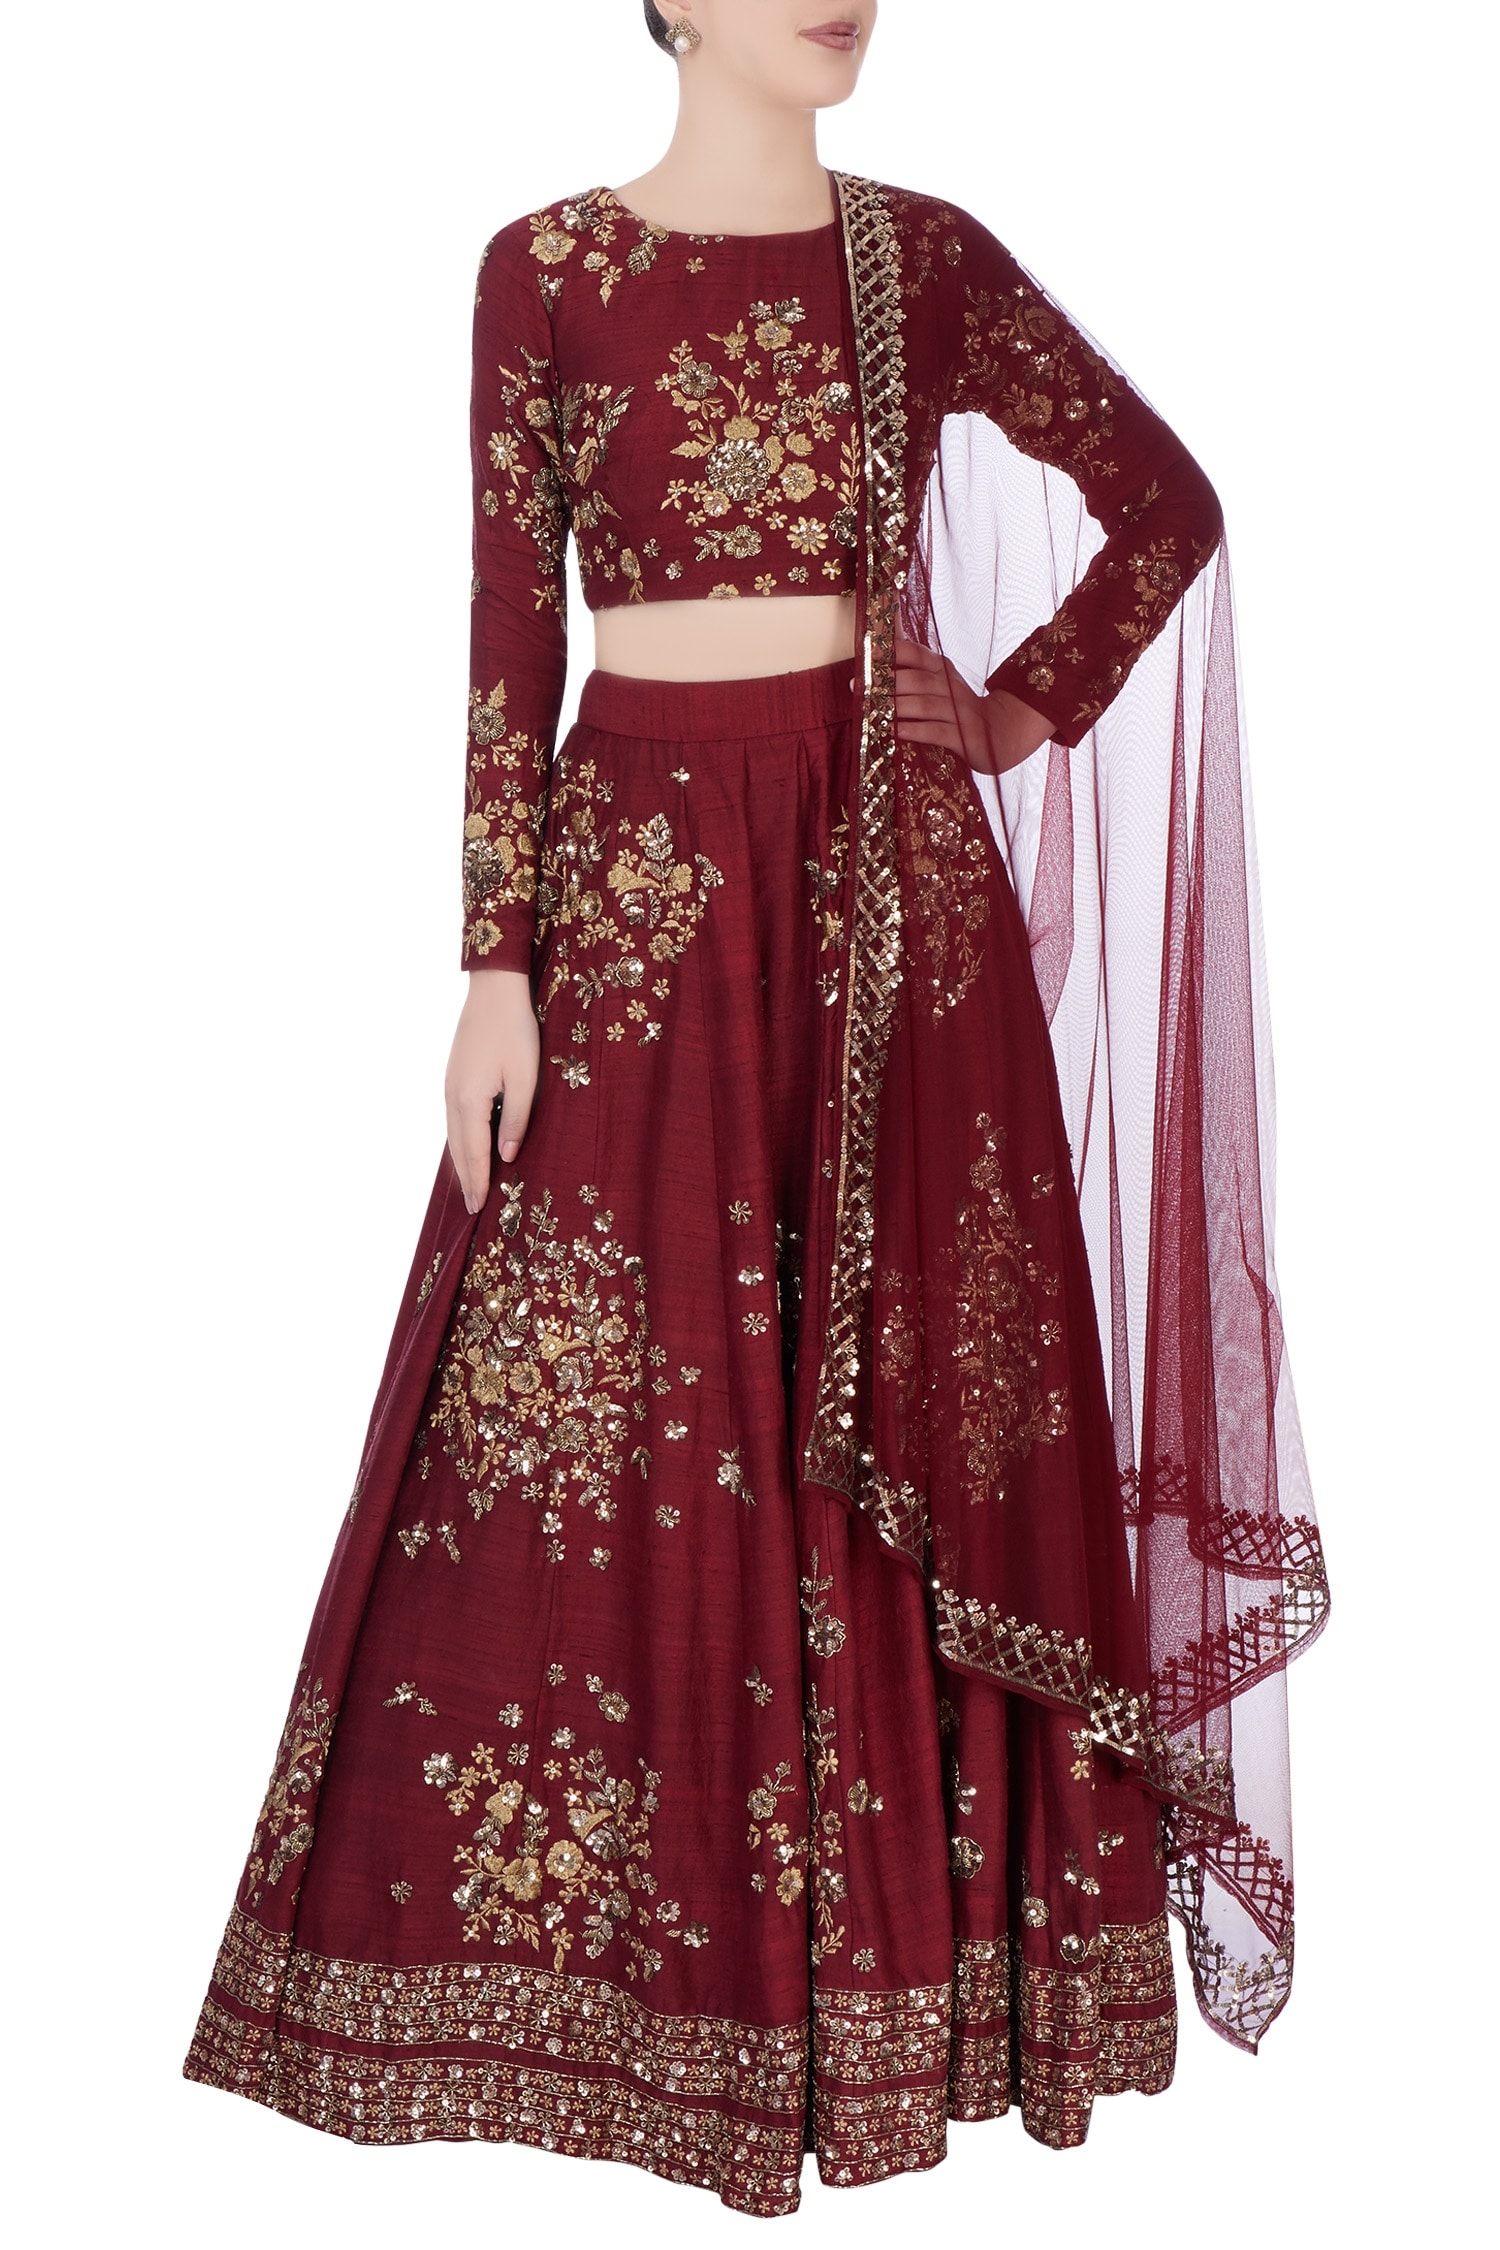 Astha Narang Maroon Embroidered Floral Round Neck Lehenga Set For Women